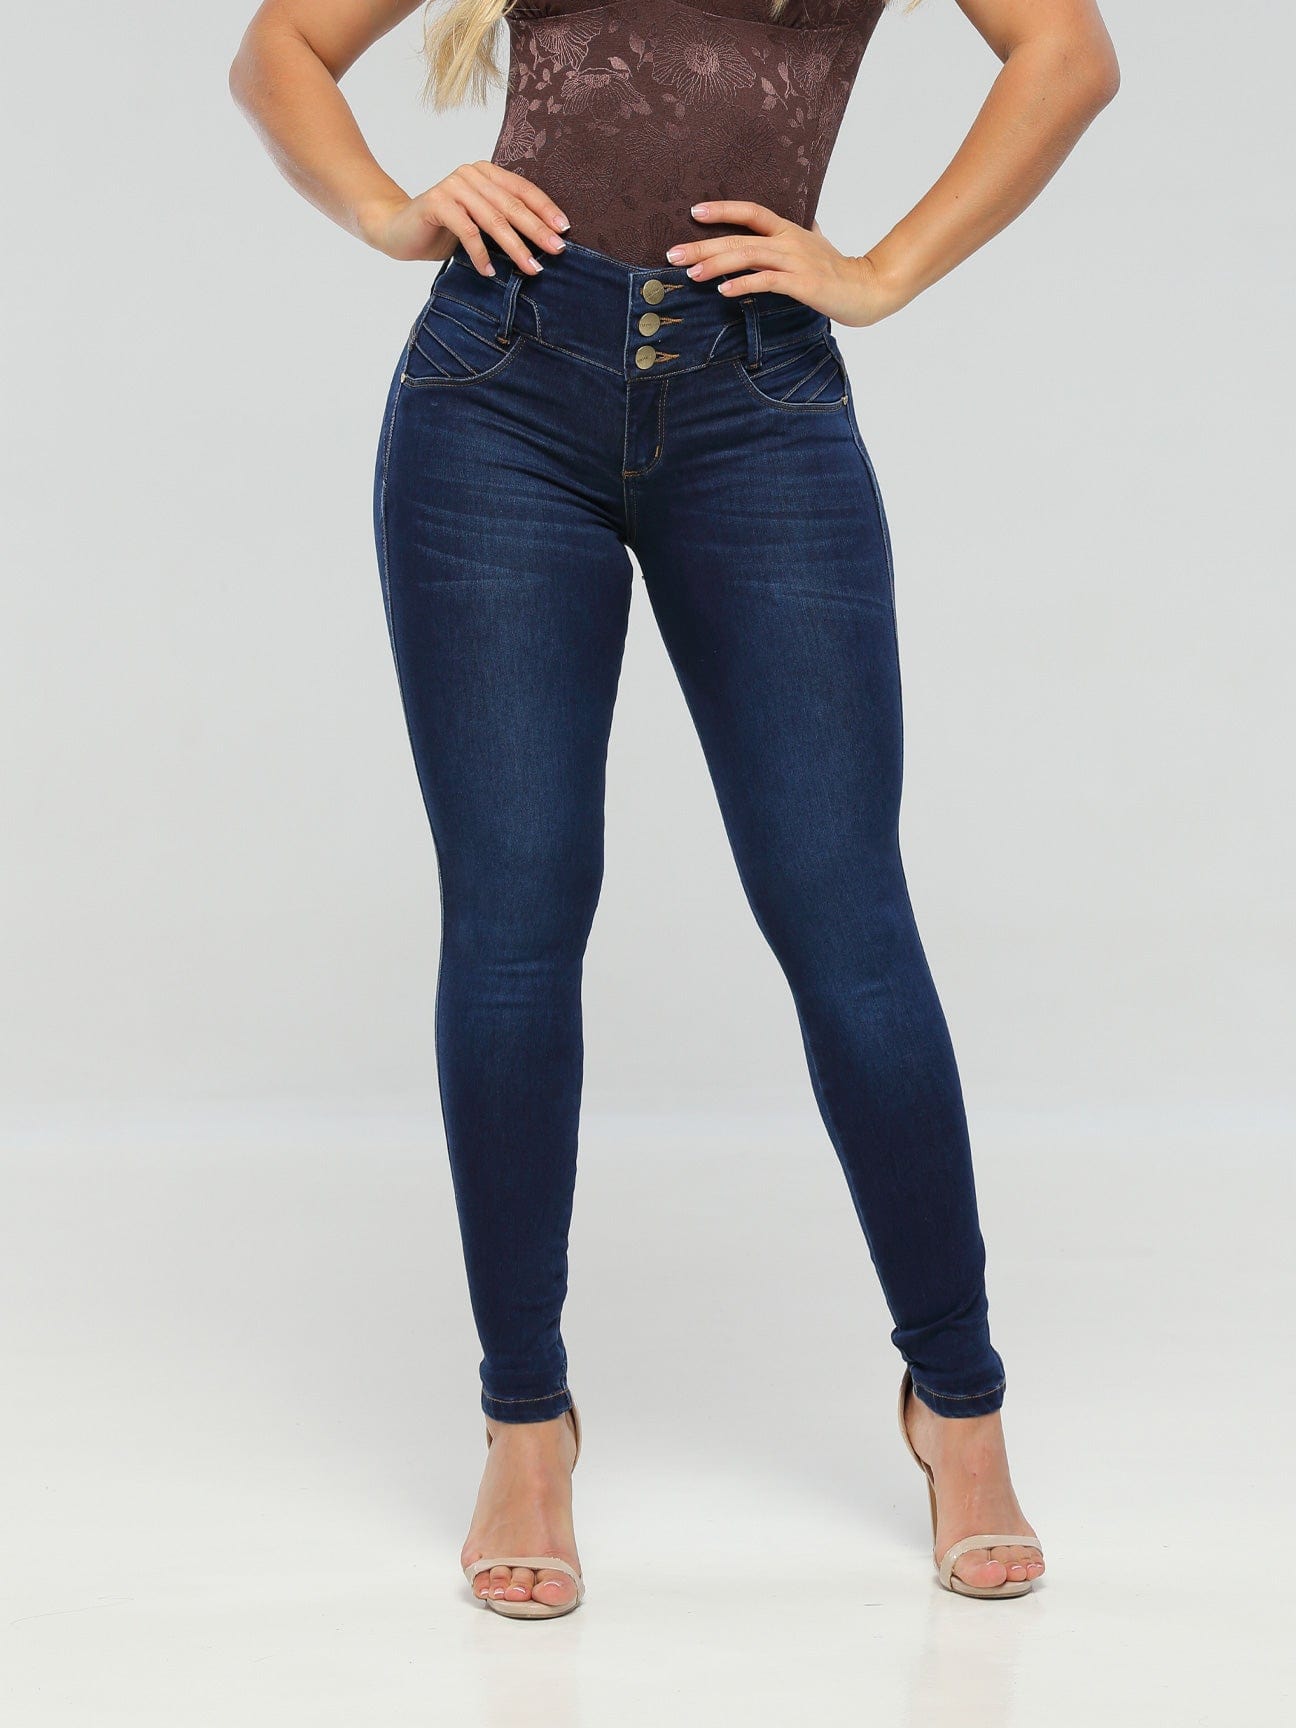 Colombian Jeans | Butt Lift Jeans | Jeans Colombianos